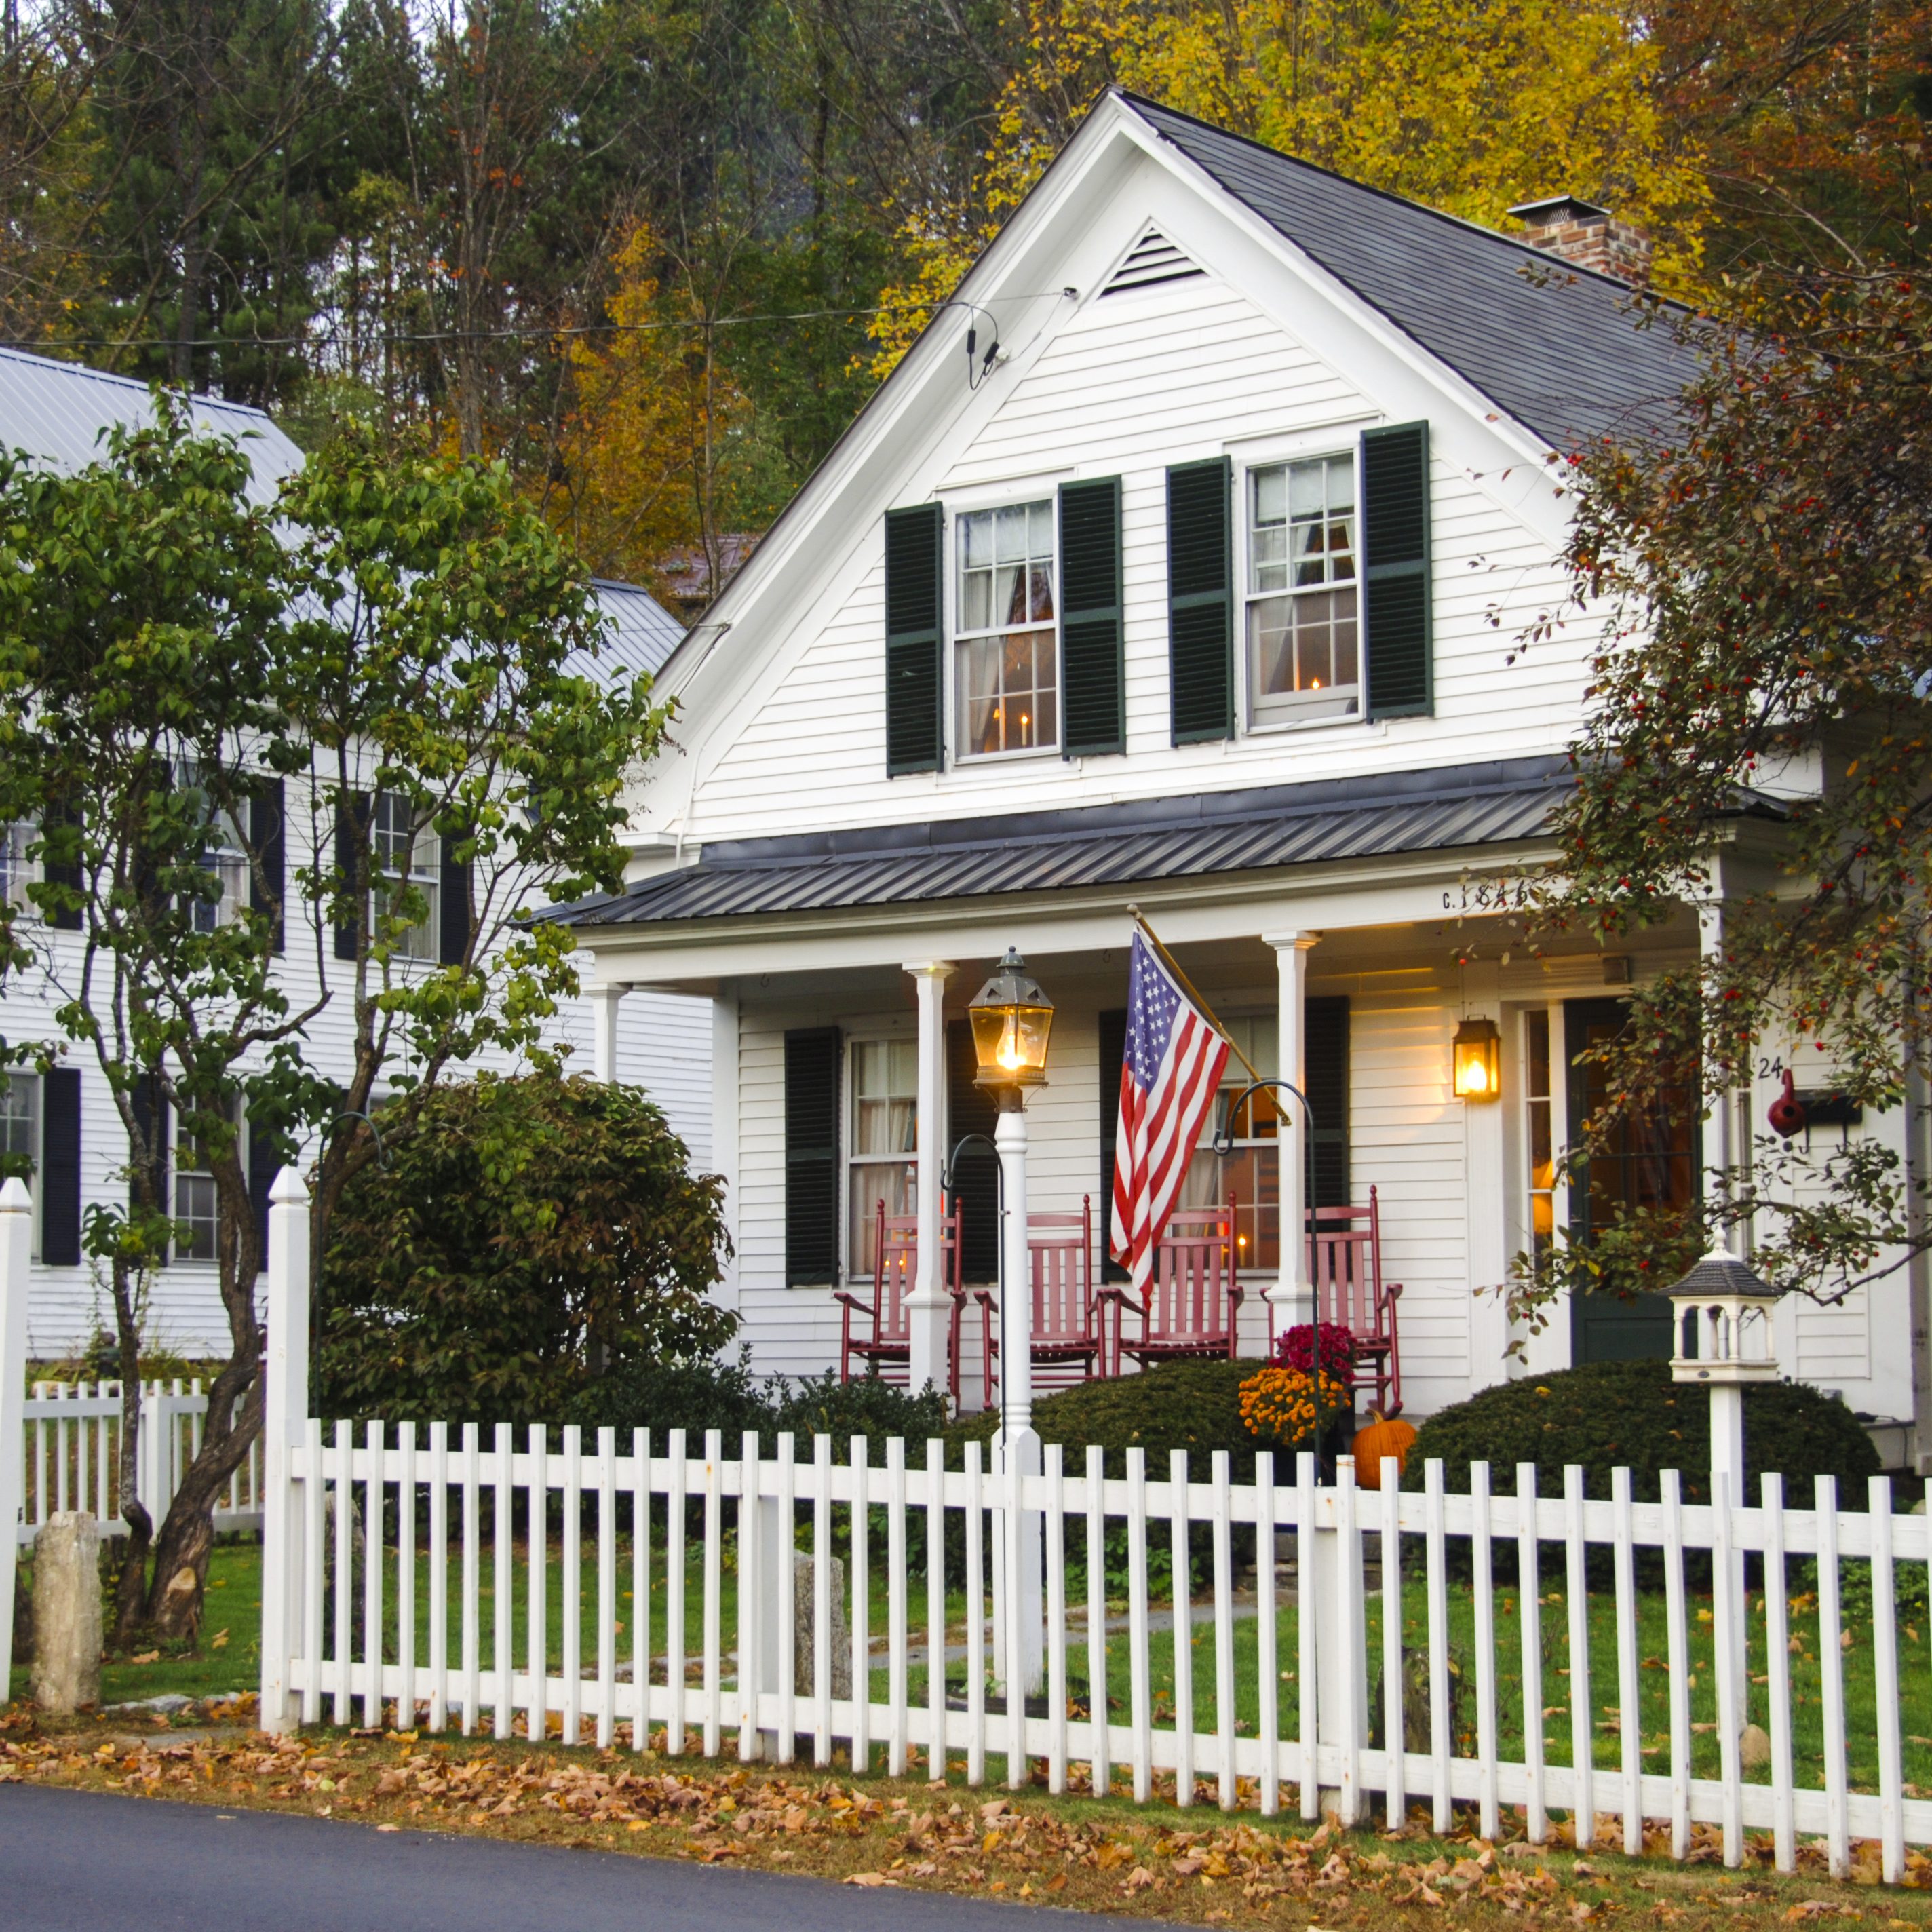 White clapboard house with a white picket fence